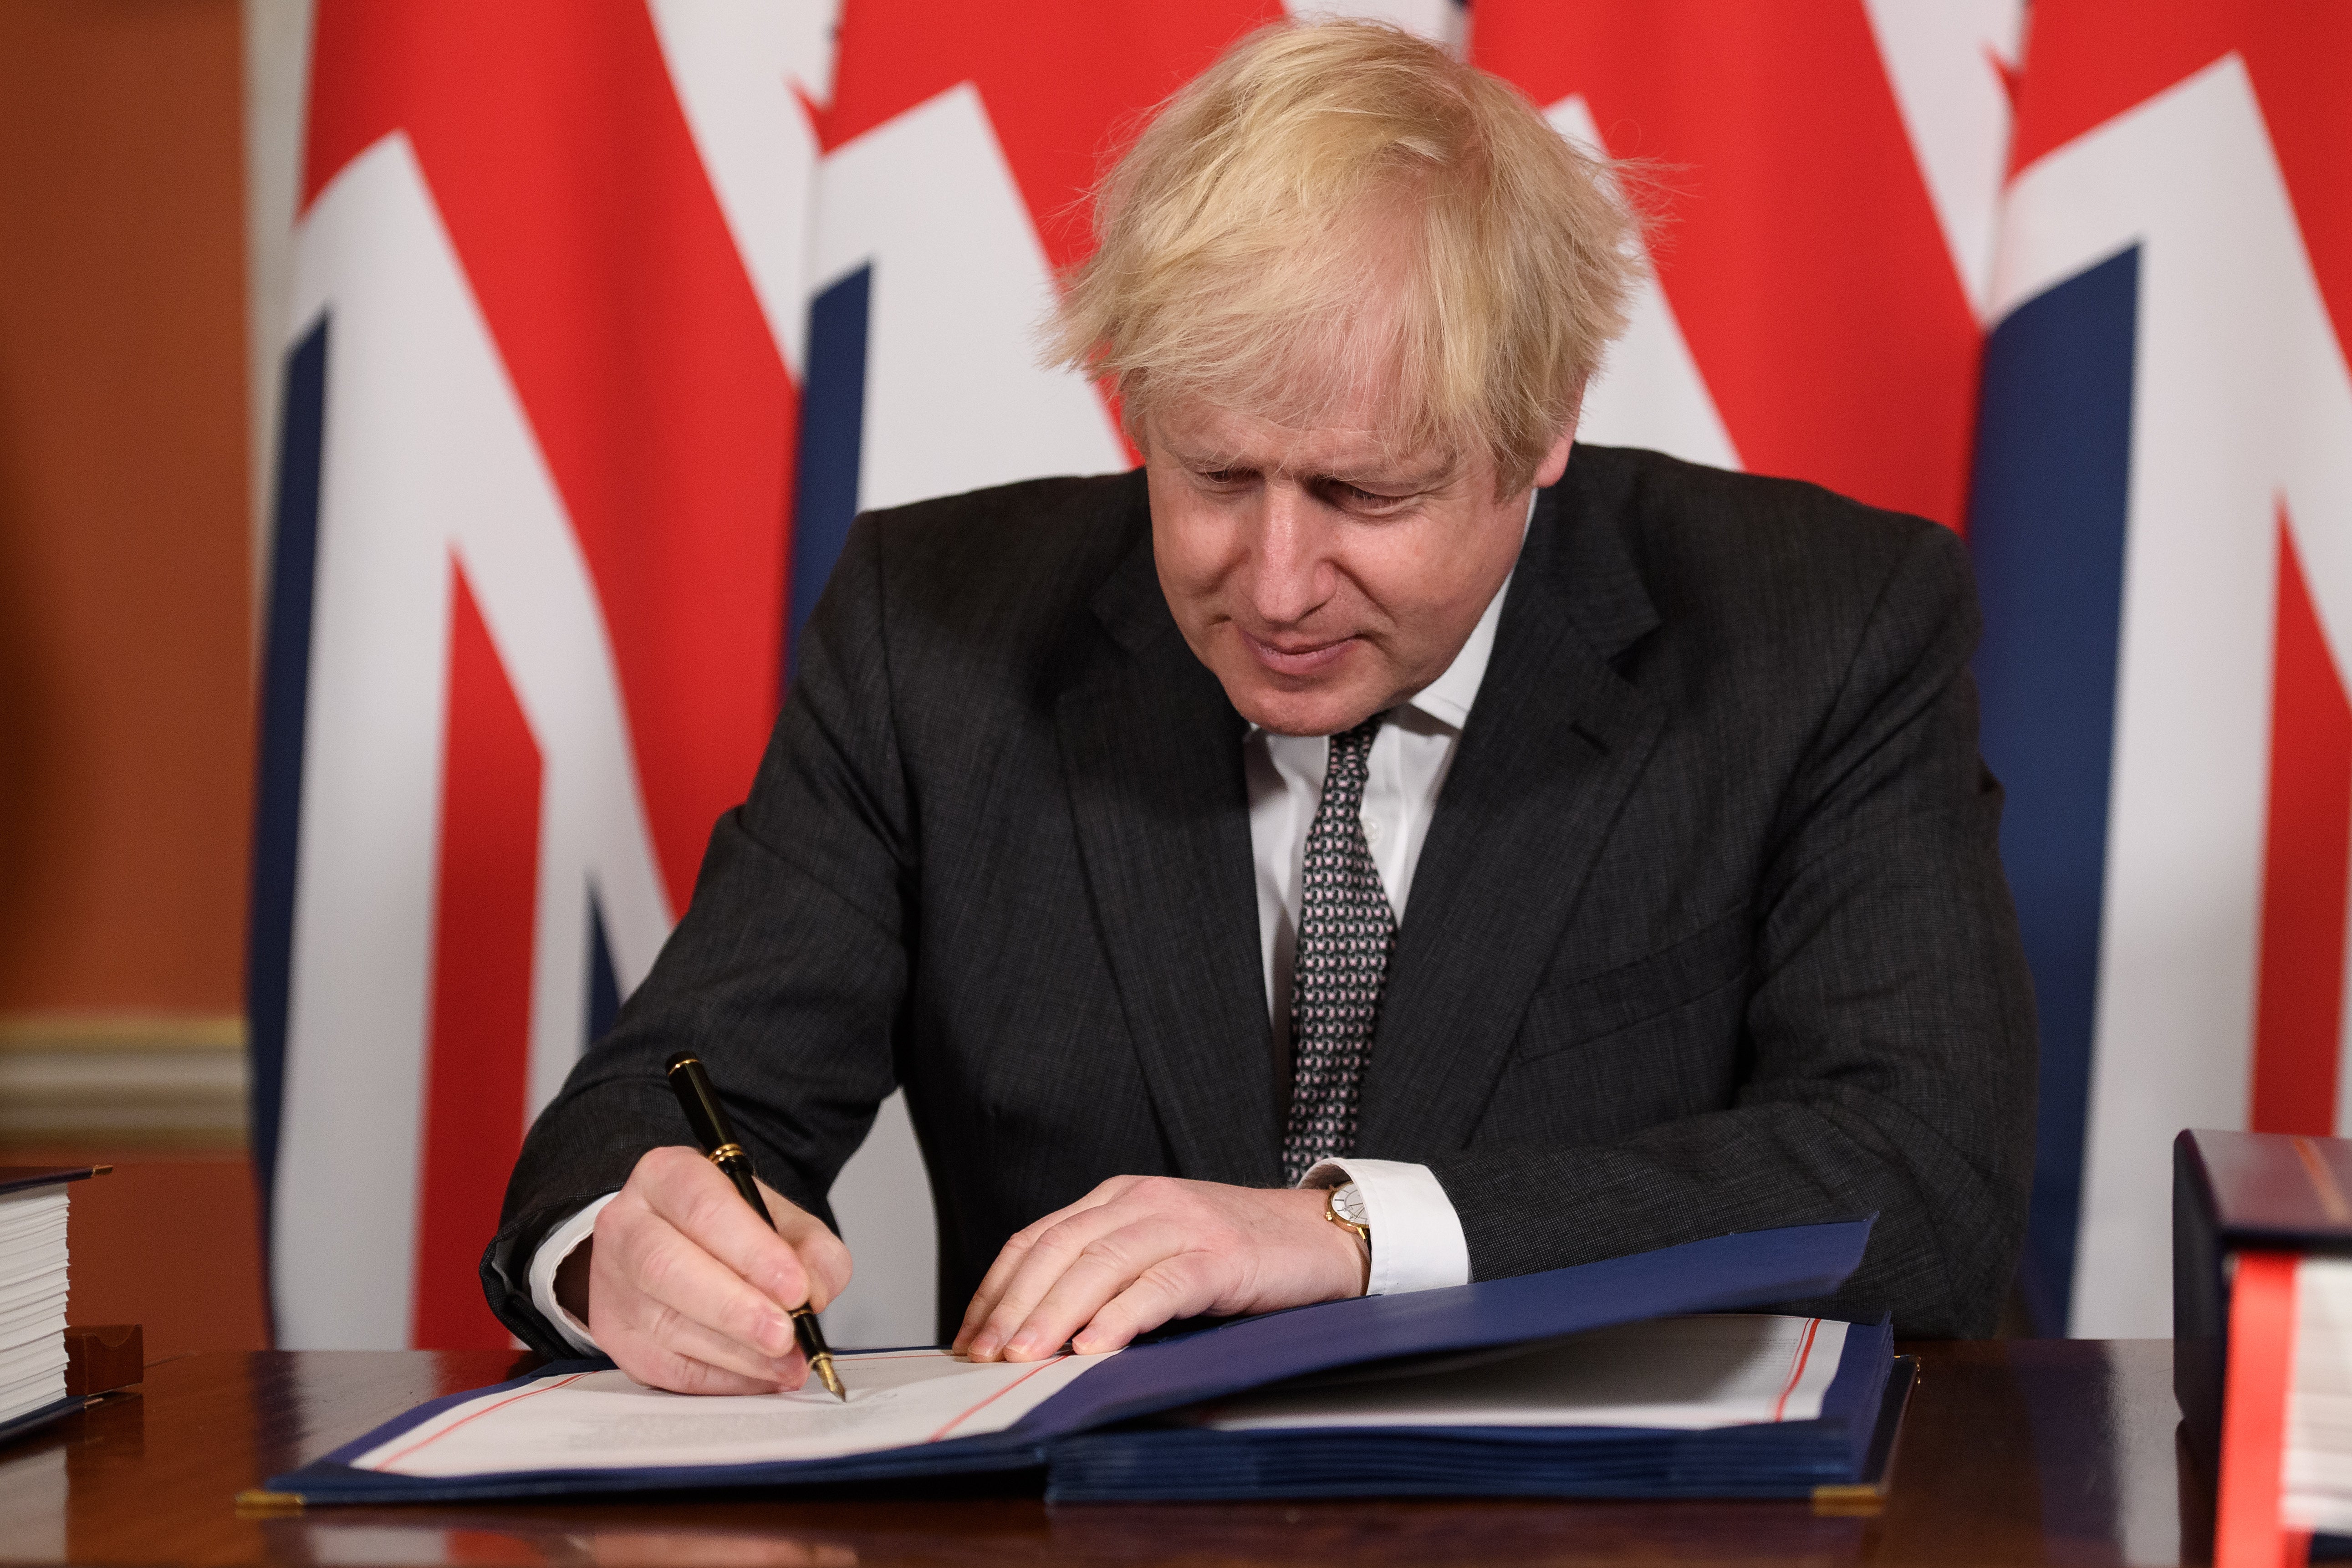 Boris Johnson signs a page of the Brexit trade deal with the EU in number 10 Downing Street on December 30, 2020